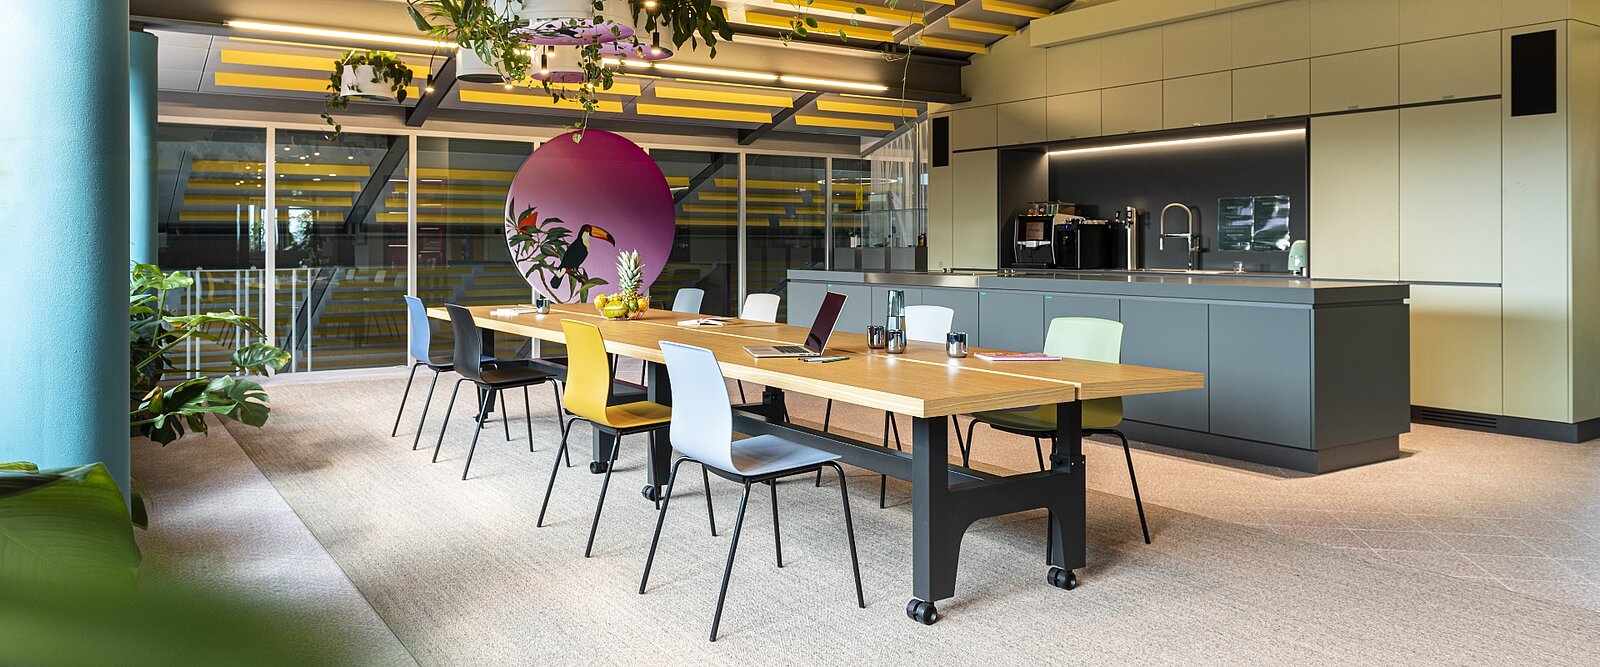 The office as an expression of creativity: Meeting rooms can be given a very individual design with Fiore.